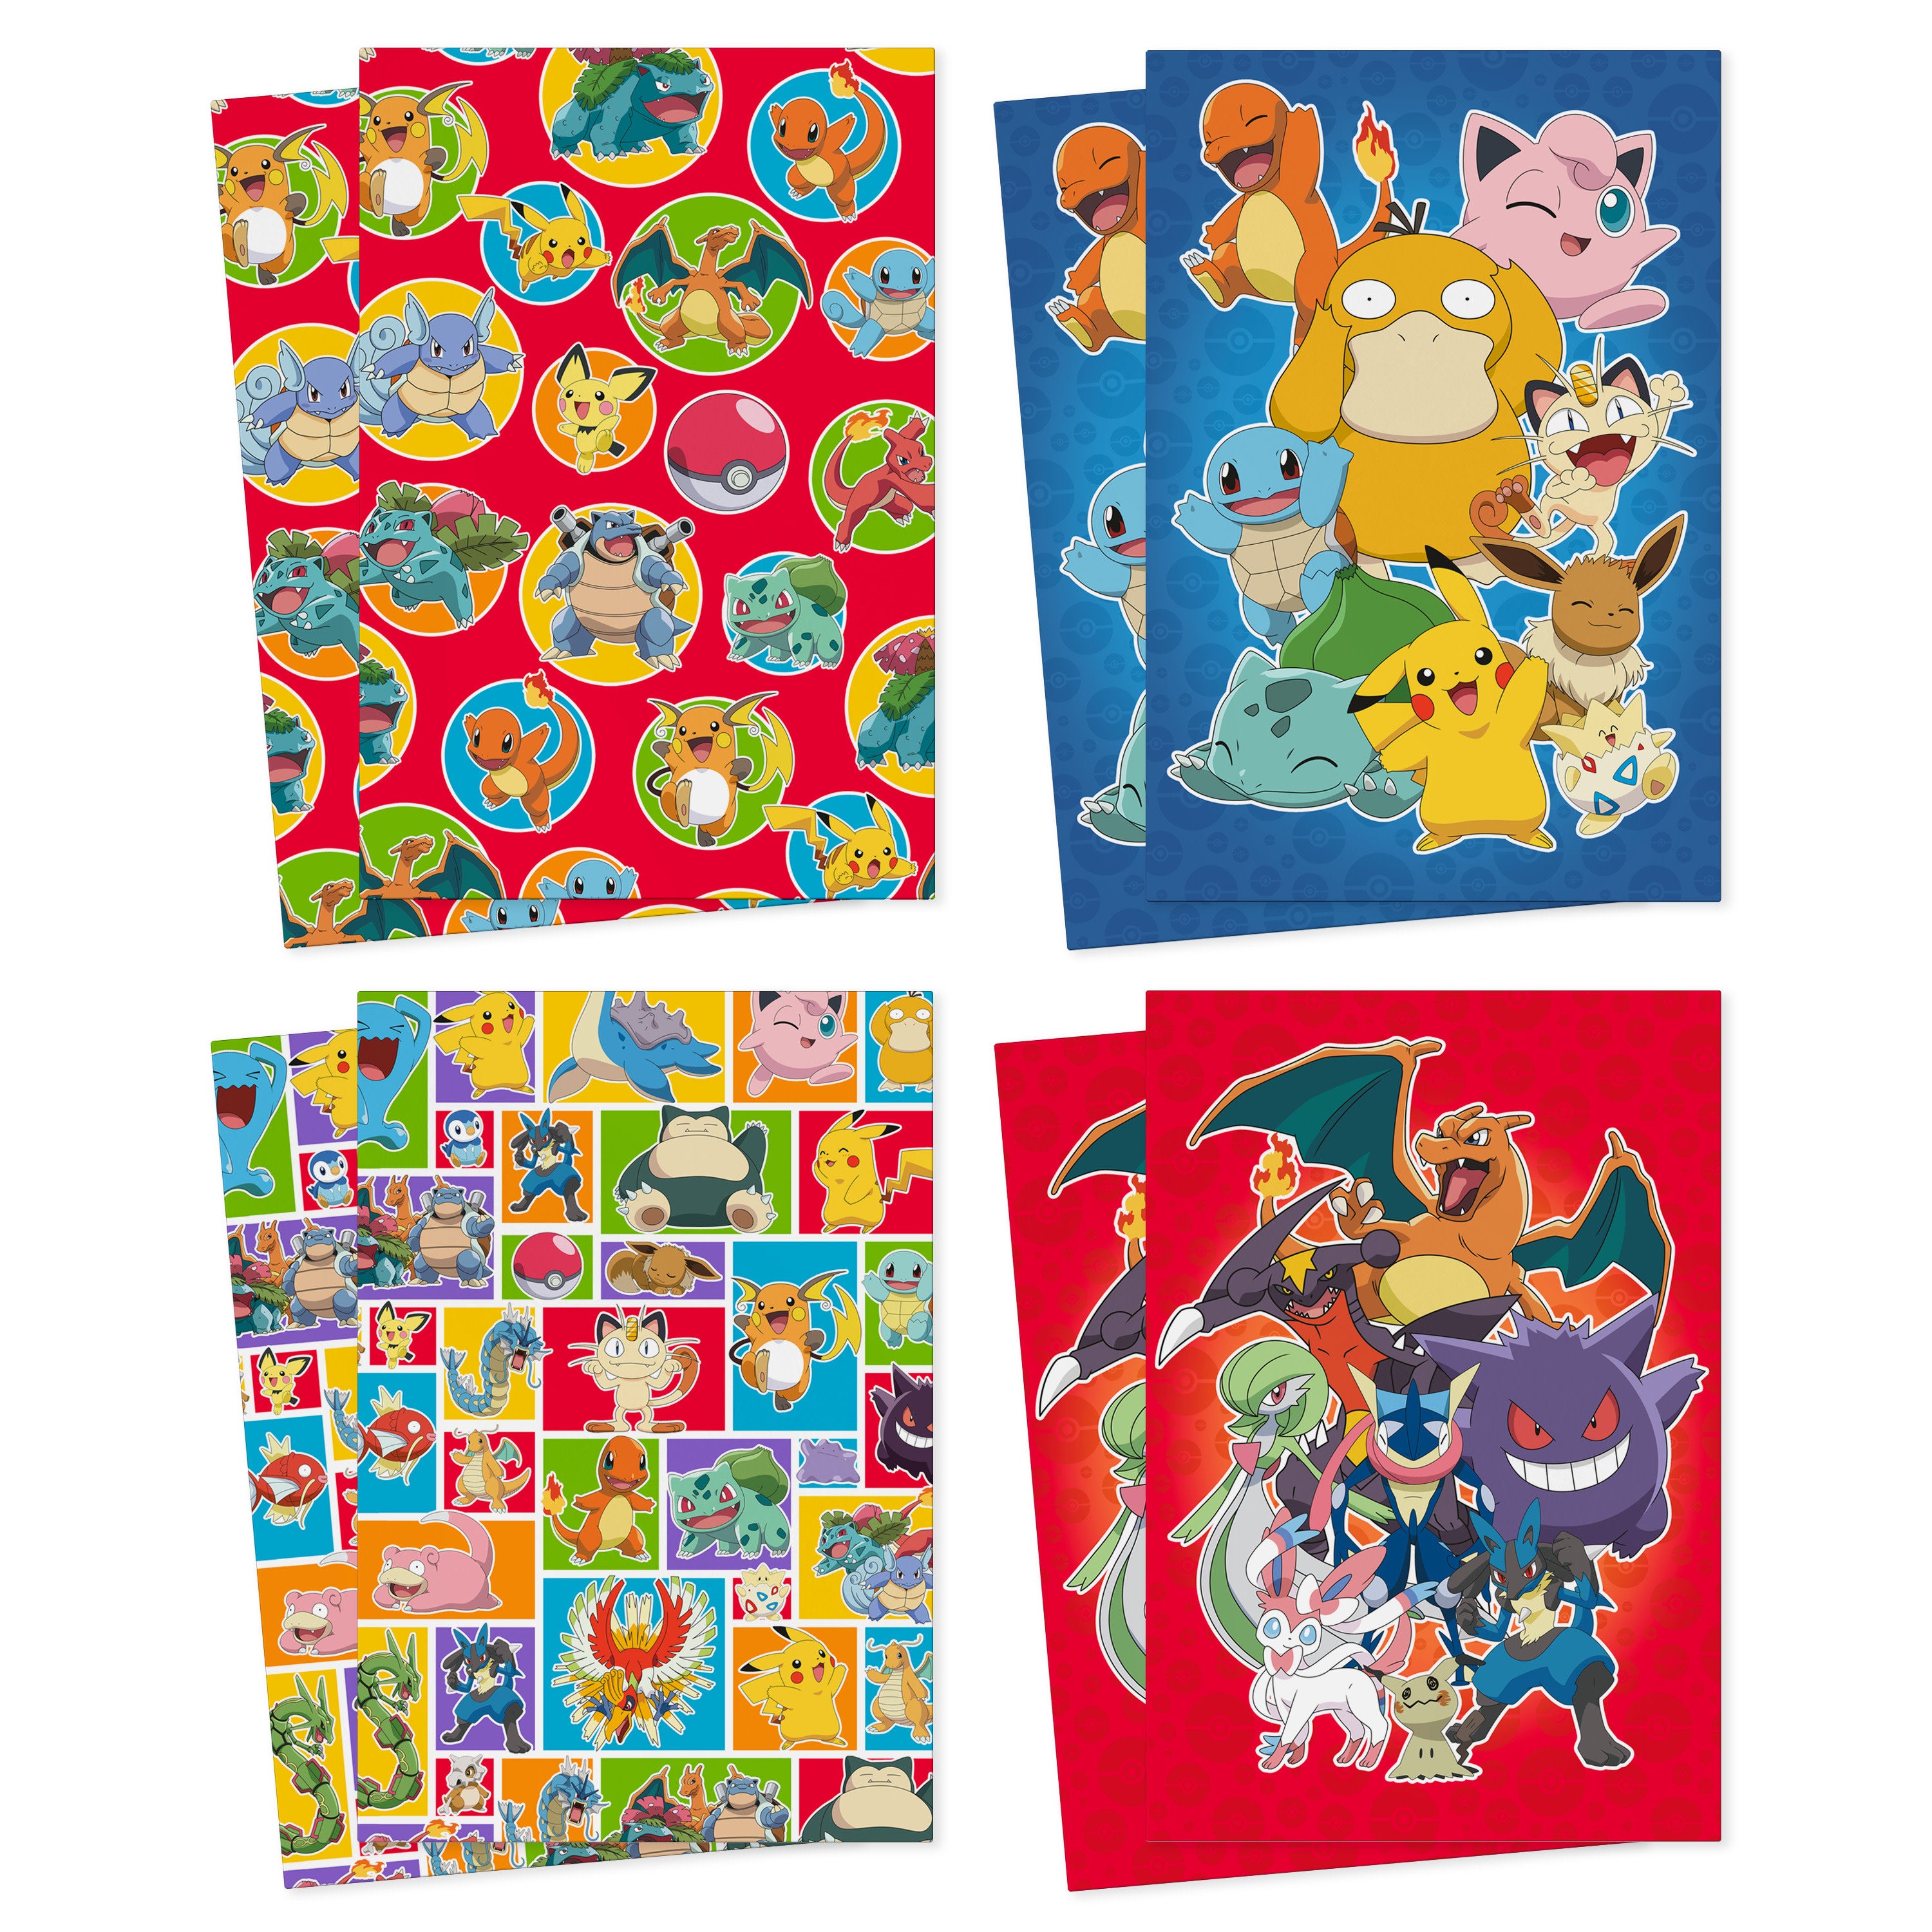 Hallmark 14" Medium Pokémon Gift Box Set (8 Boxes with Lids, 2 of 4 Designs) for Kids, Parties, Back to School, Christmas